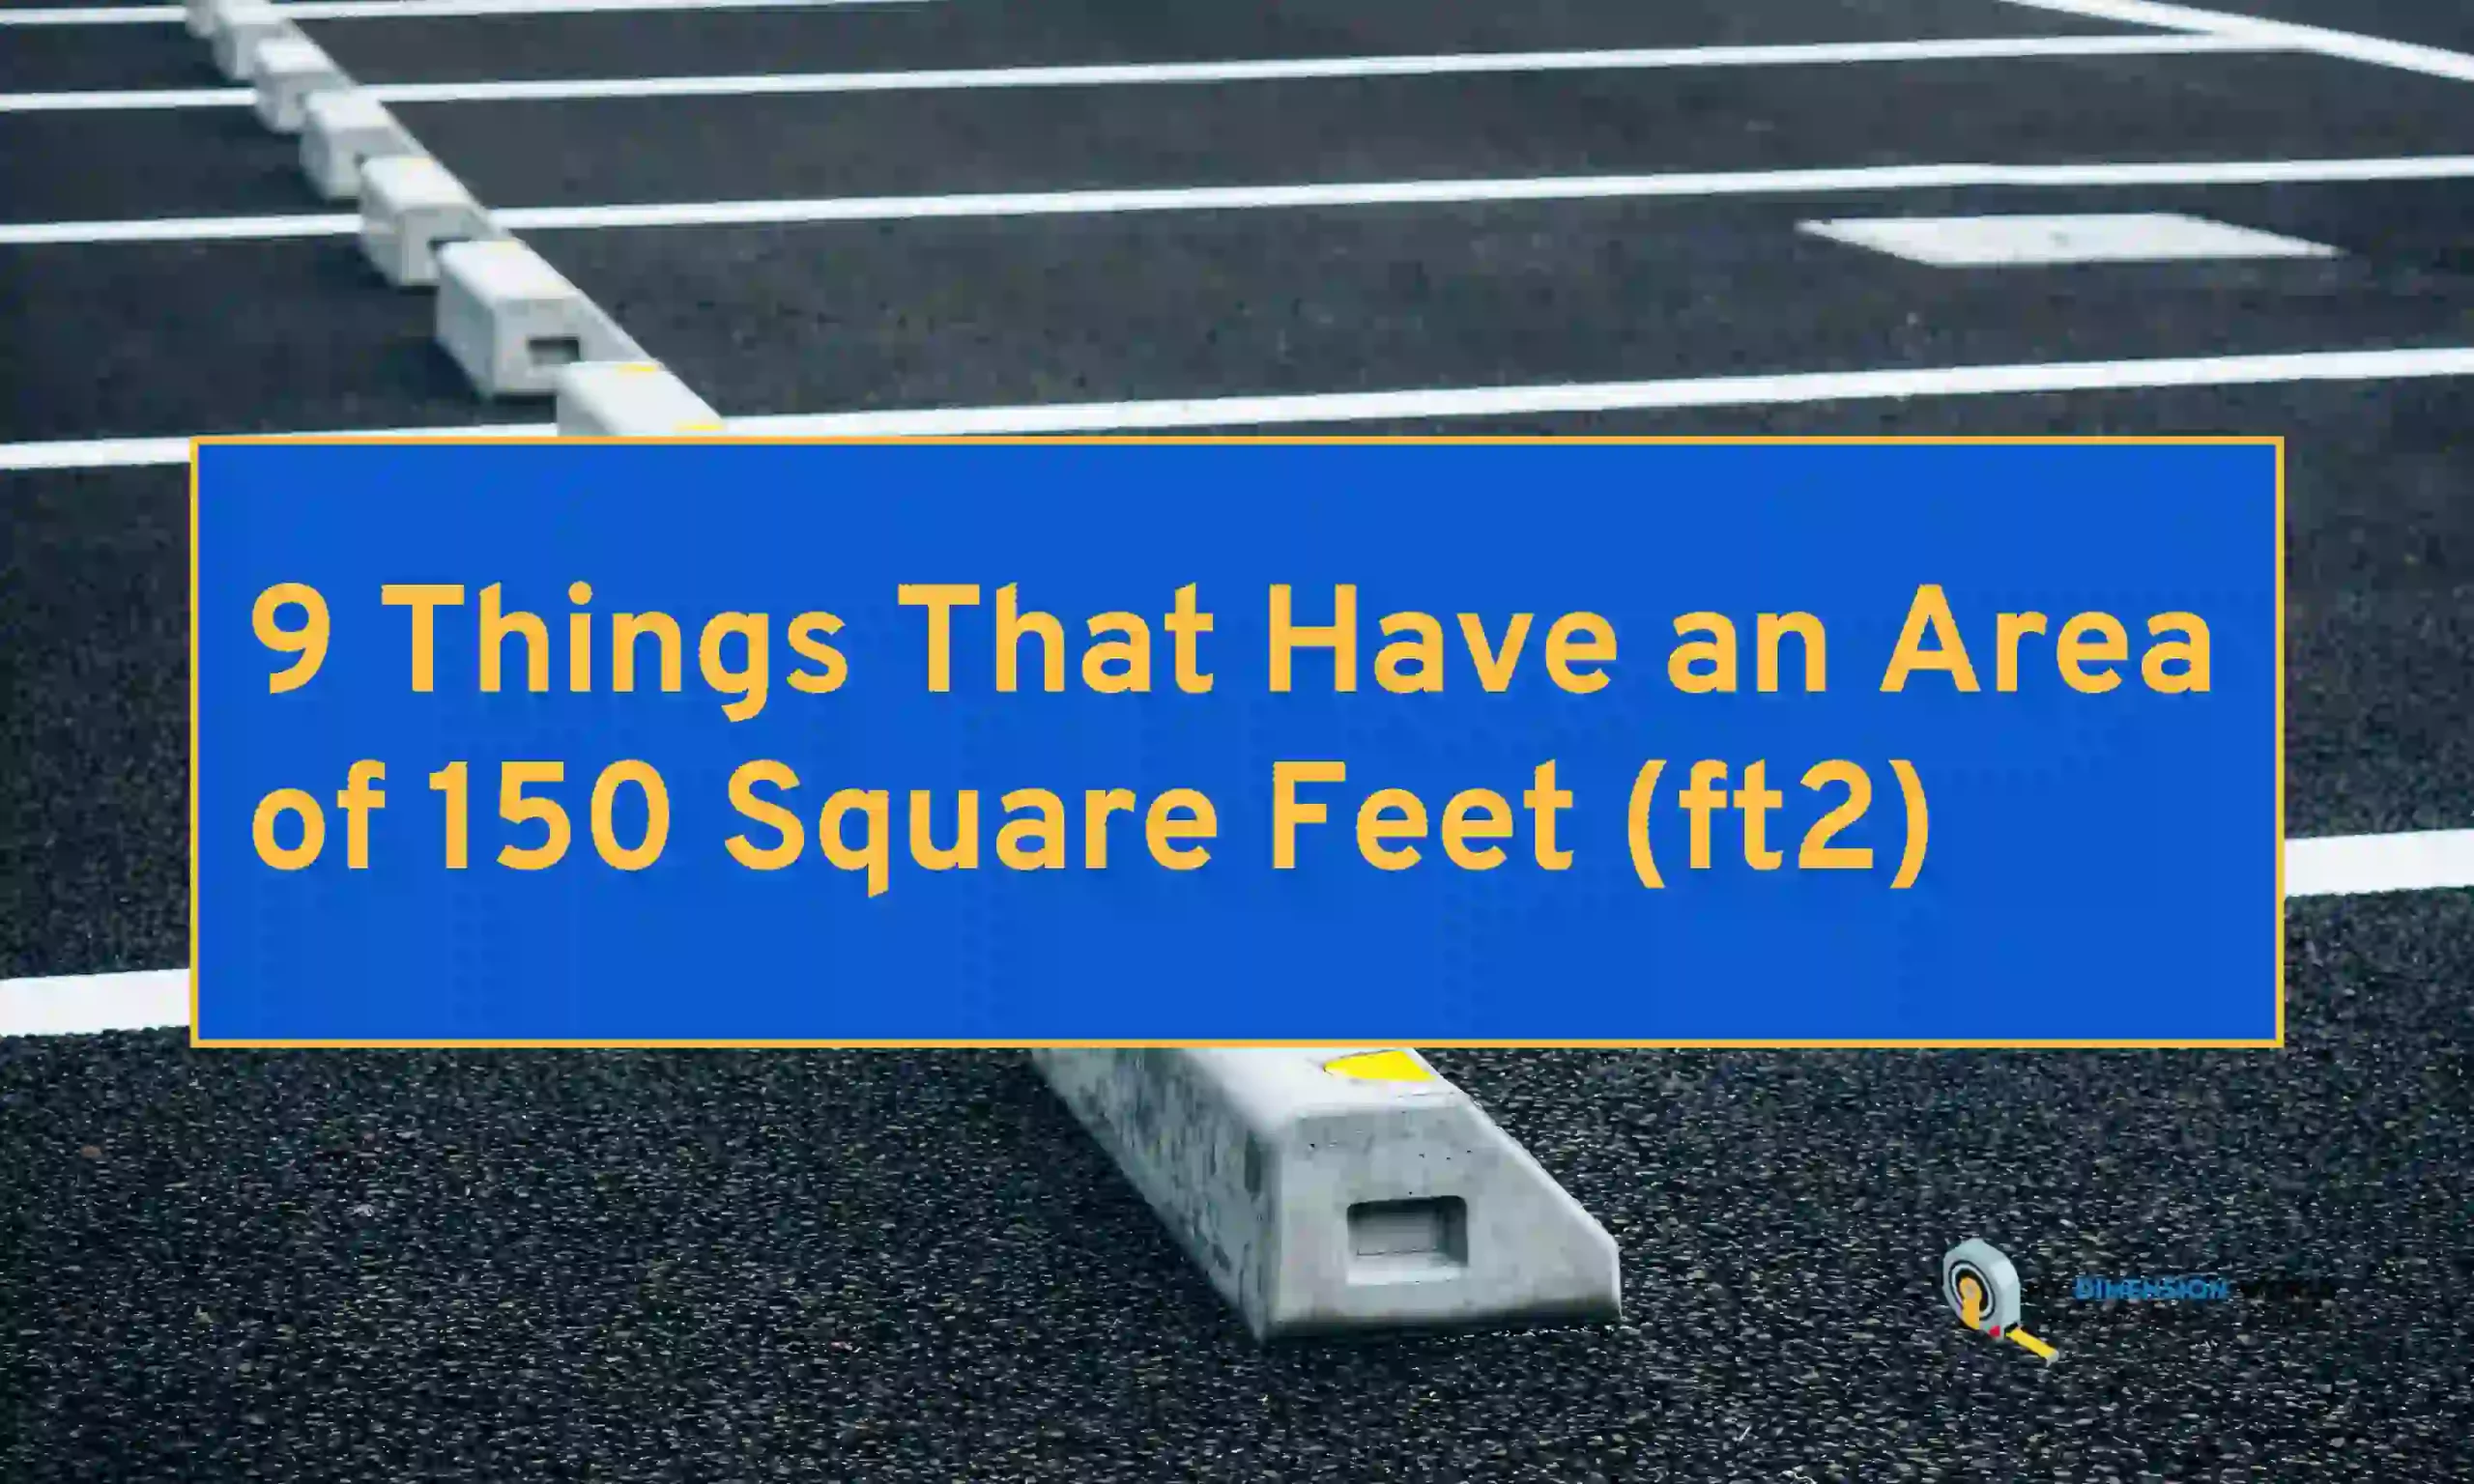 9 Things That Have an Area of 150 Square Feet (ft2)